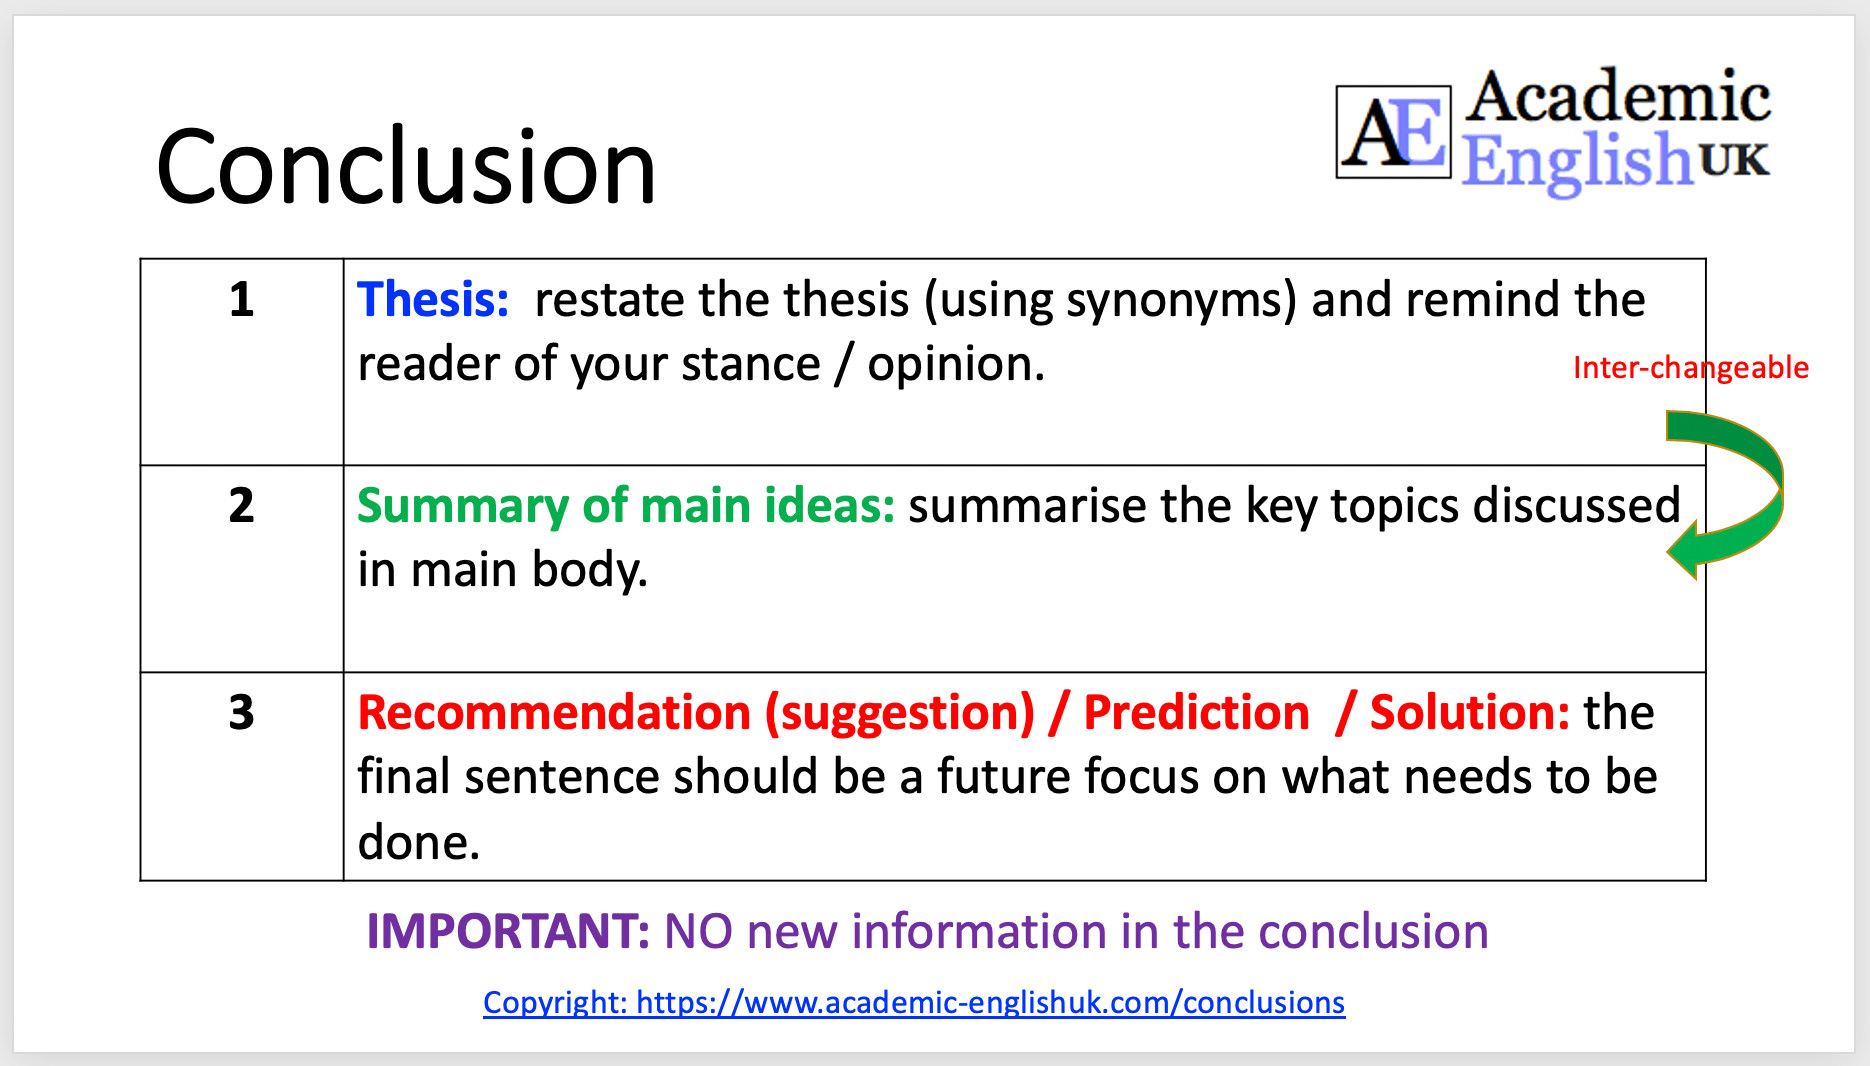 how to create a good conclusion